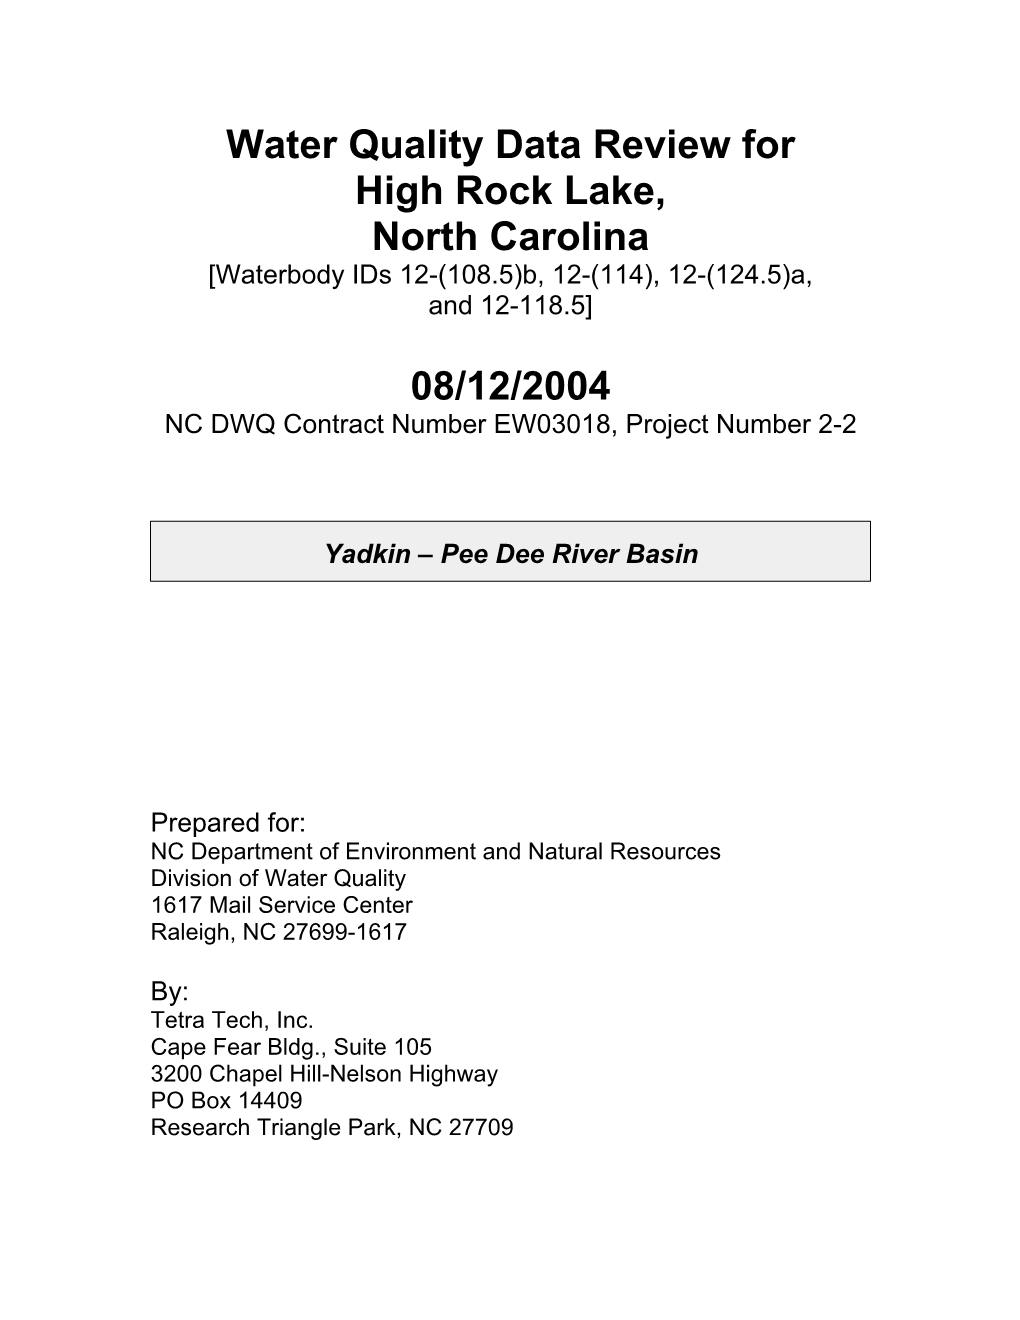 Water Quality Data Review for High Rock Lake, North Carolina [Waterbody Ids 12-(108.5)B, 12-(114), 12-(124.5)A, and 12-118.5]